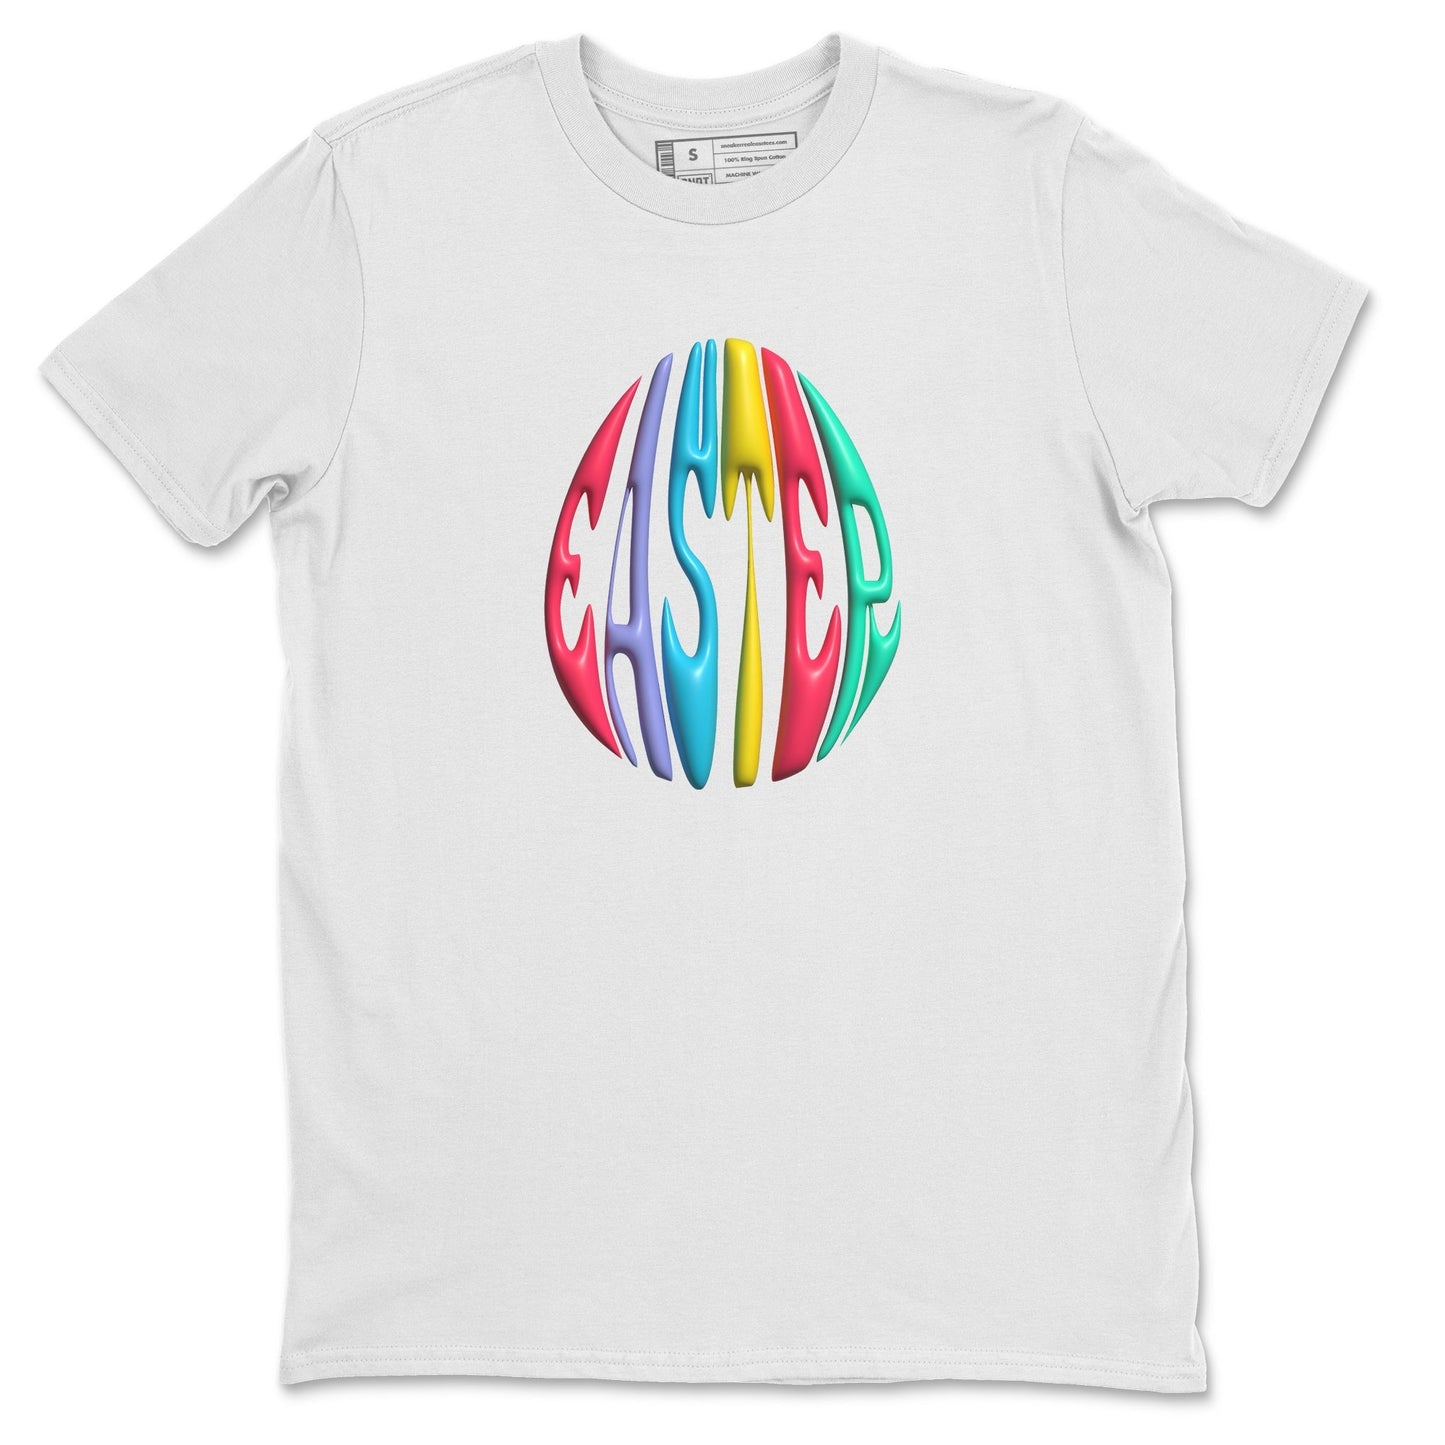 Dunk Easter Candy Sneaker Tees Drip Gear Zone 3D Easter Typo Sneaker Tees Nike Easter Shirt Unisex Shirts White 2